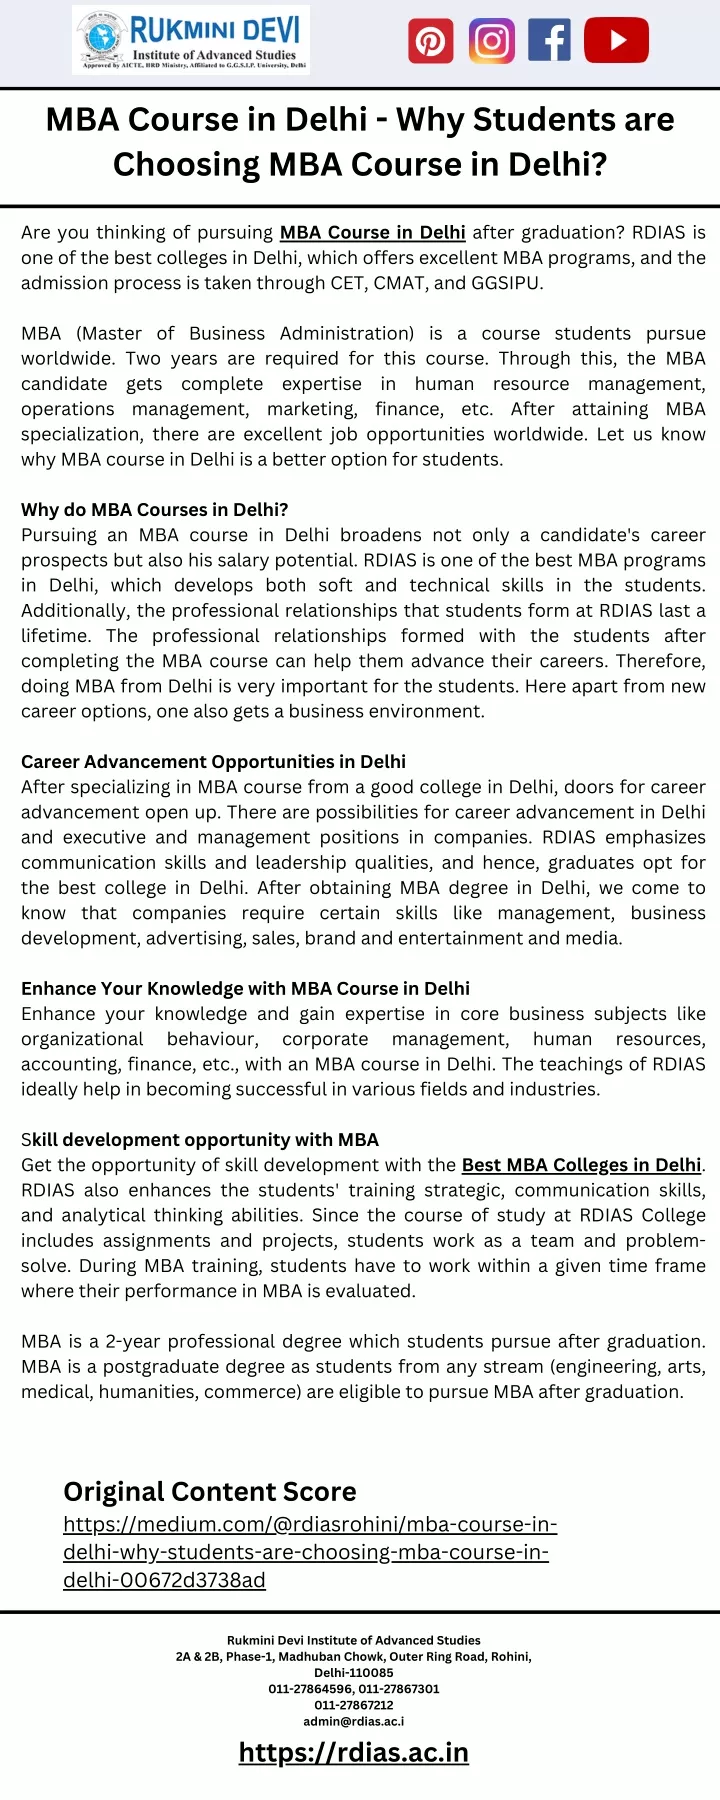 mba course in delhi why students are choosing